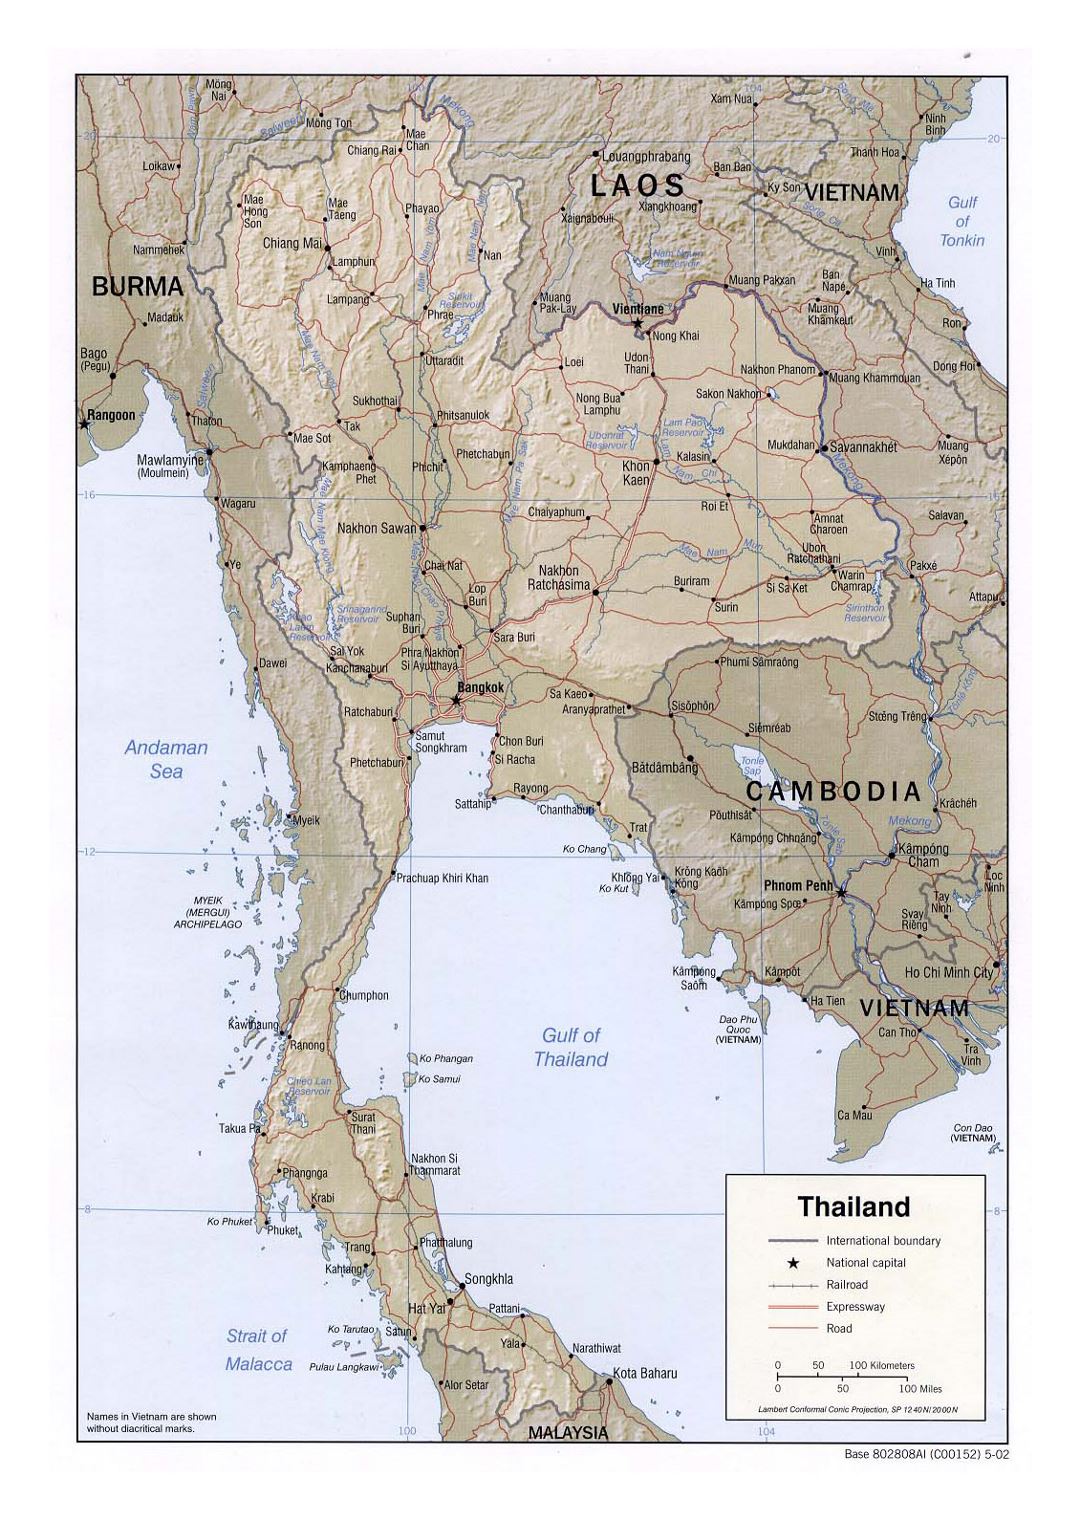 Detailed political map of Thailand with relief, roads, railorads and major cities - 2002